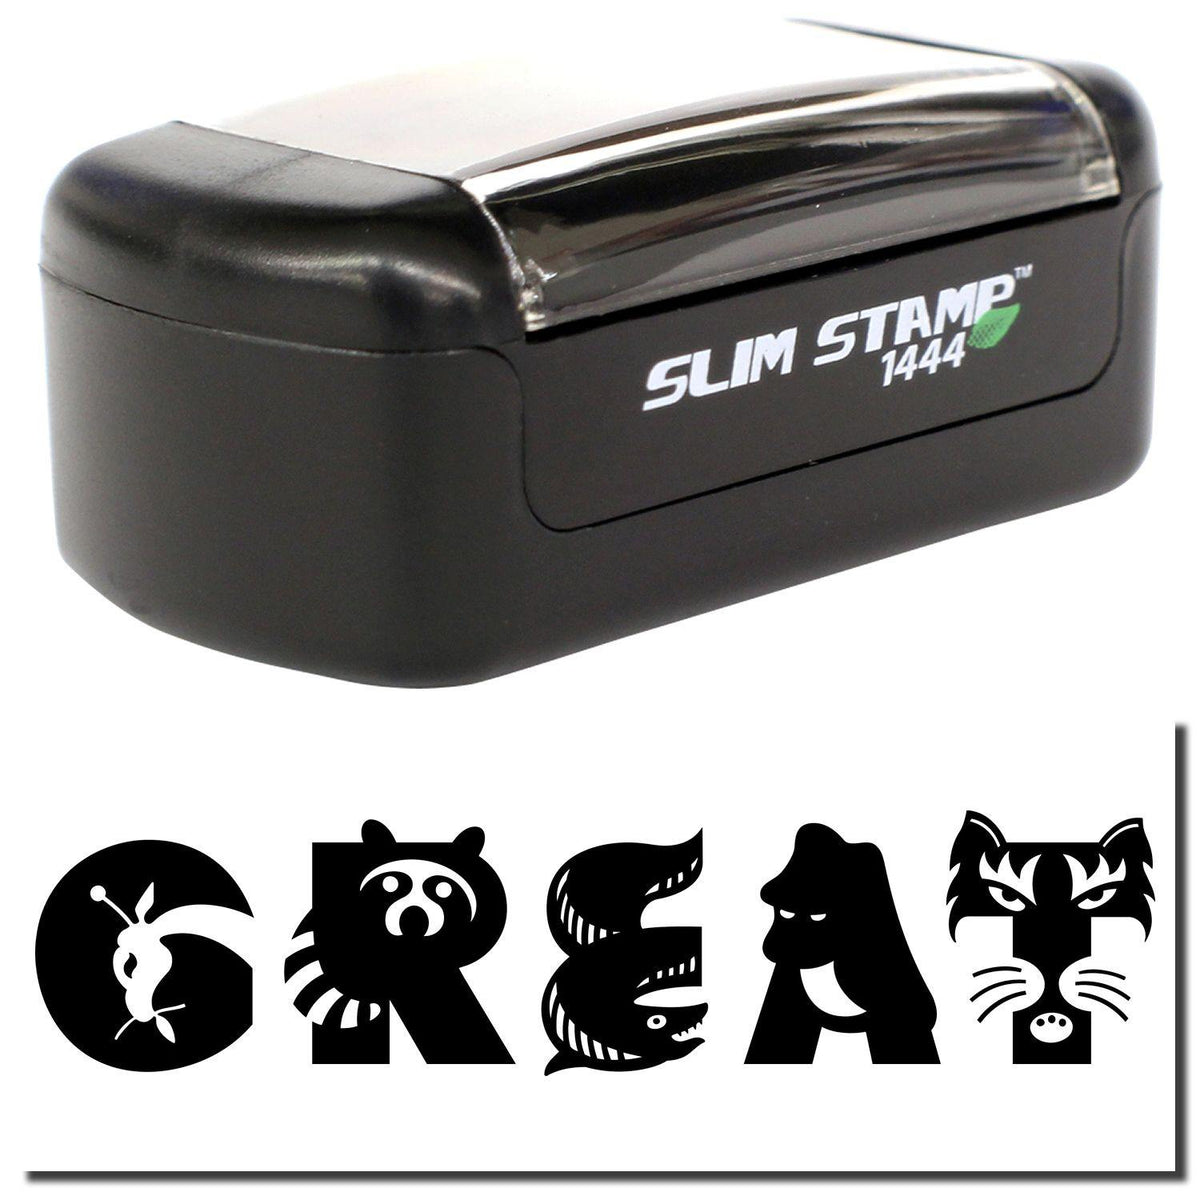 A stock office pre-inked stamp with a stamped image showing how the text &quot;GREAT&quot; (Each letter in the word &quot;GREAT&quot; resembles an animal, including a giraffe, raccoon, eel, ape, and tiger) is displayed after stamping.